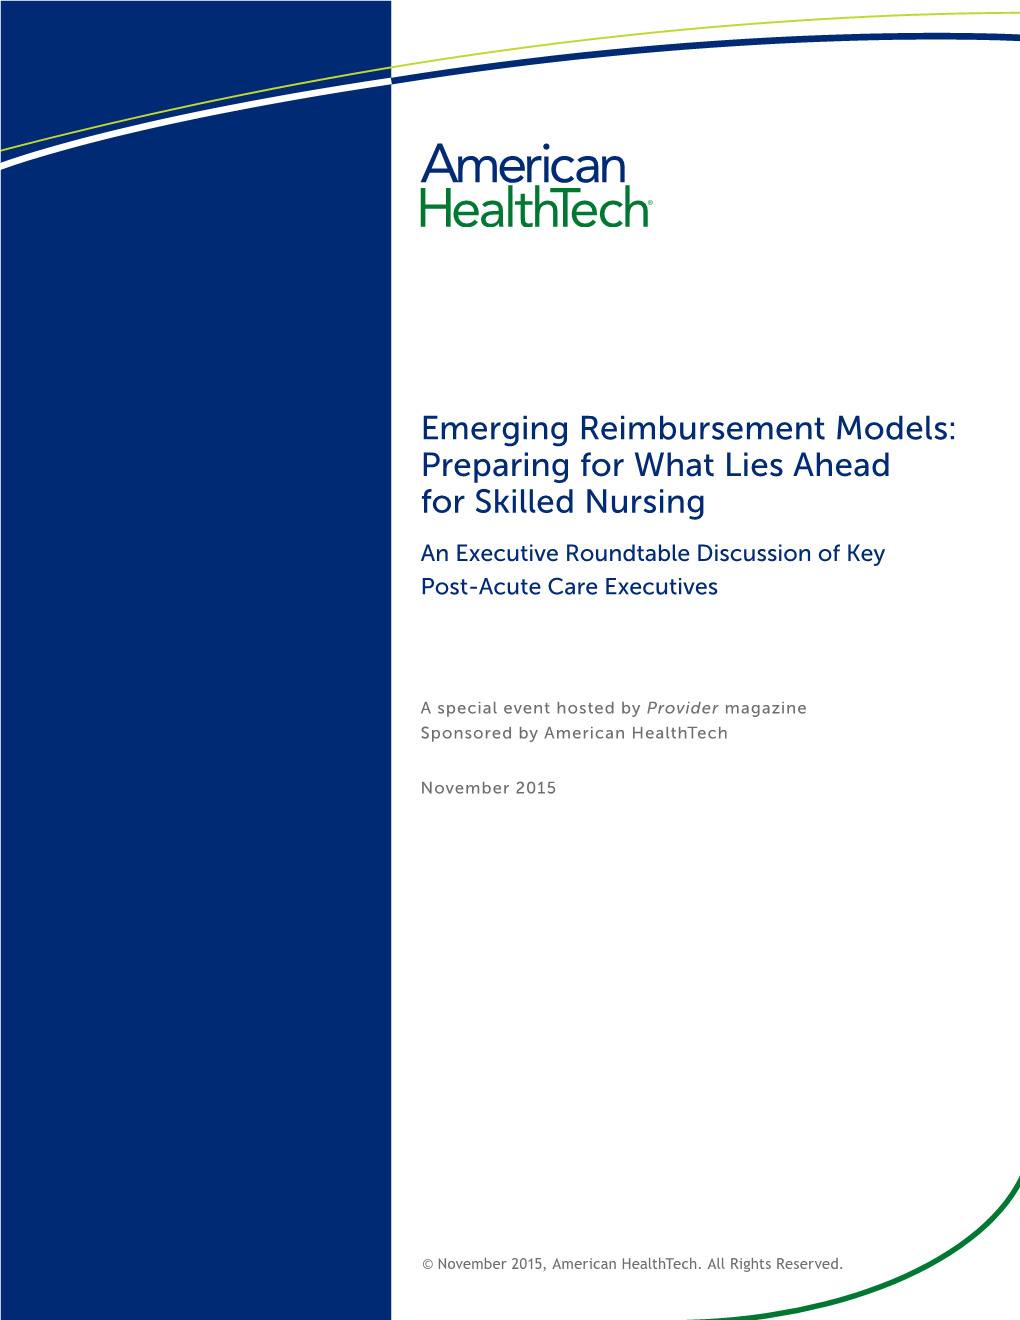 Emerging Reimbursement Models: Preparing for What Lies Ahead for Skilled Nursing an Executive Roundtable Discussion of Key Post-Acute Care Executives